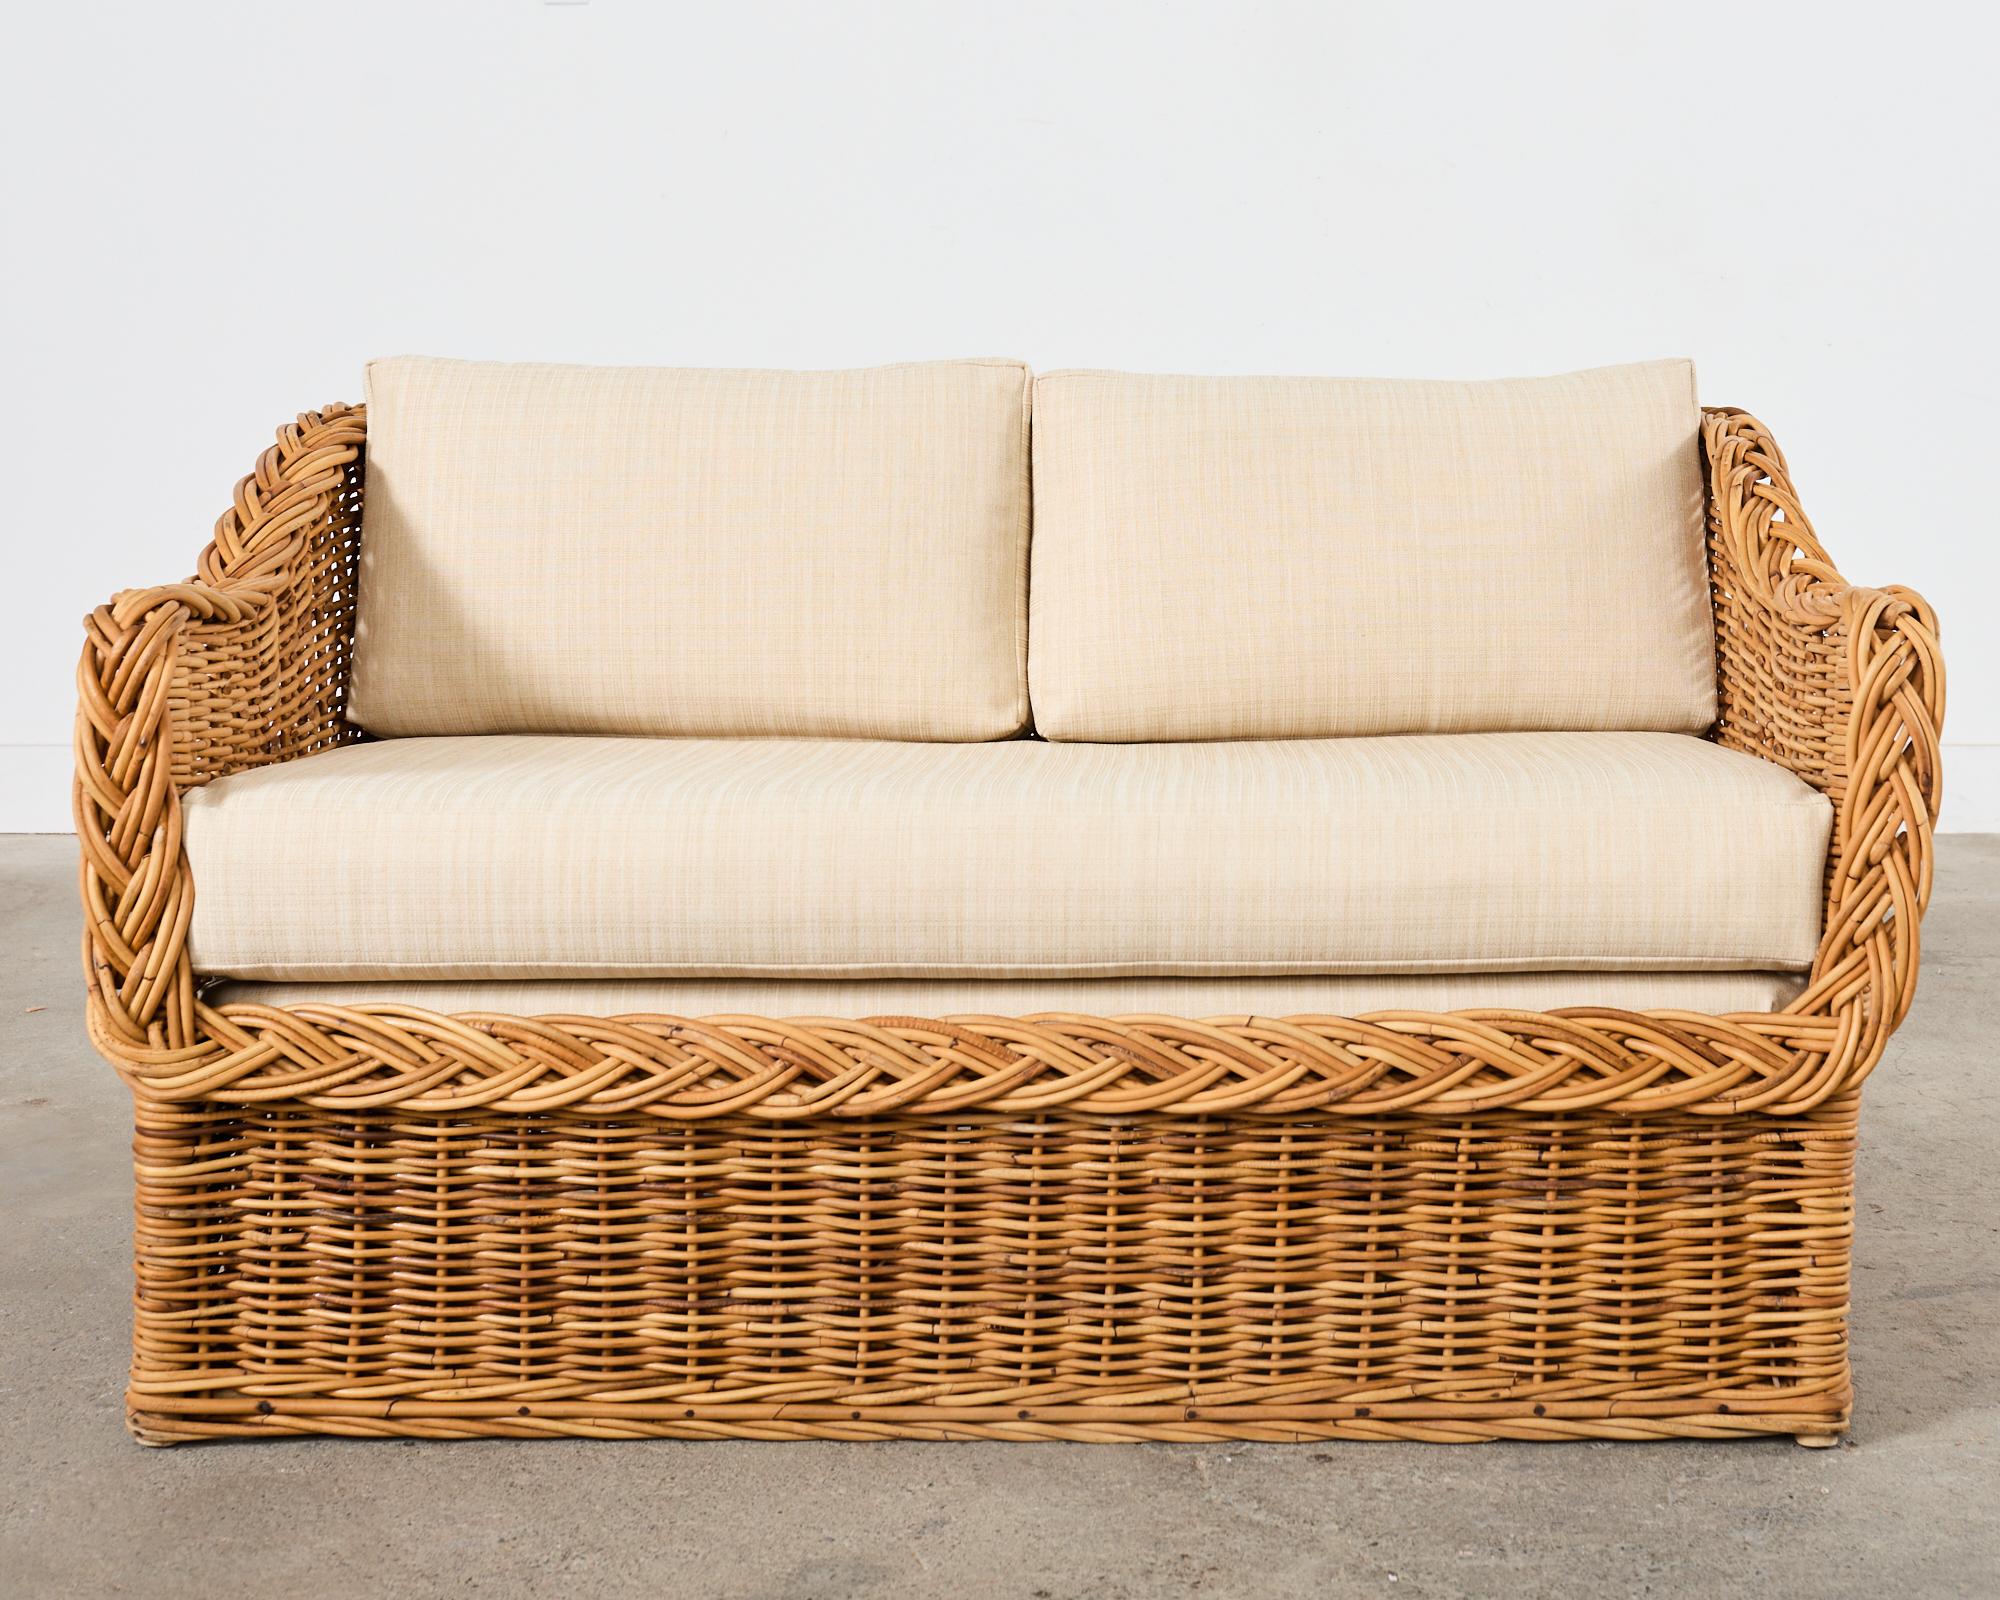 Michael Taylor Style Wicker Rattan Sofa and Settee by Wicker Works For Sale 4